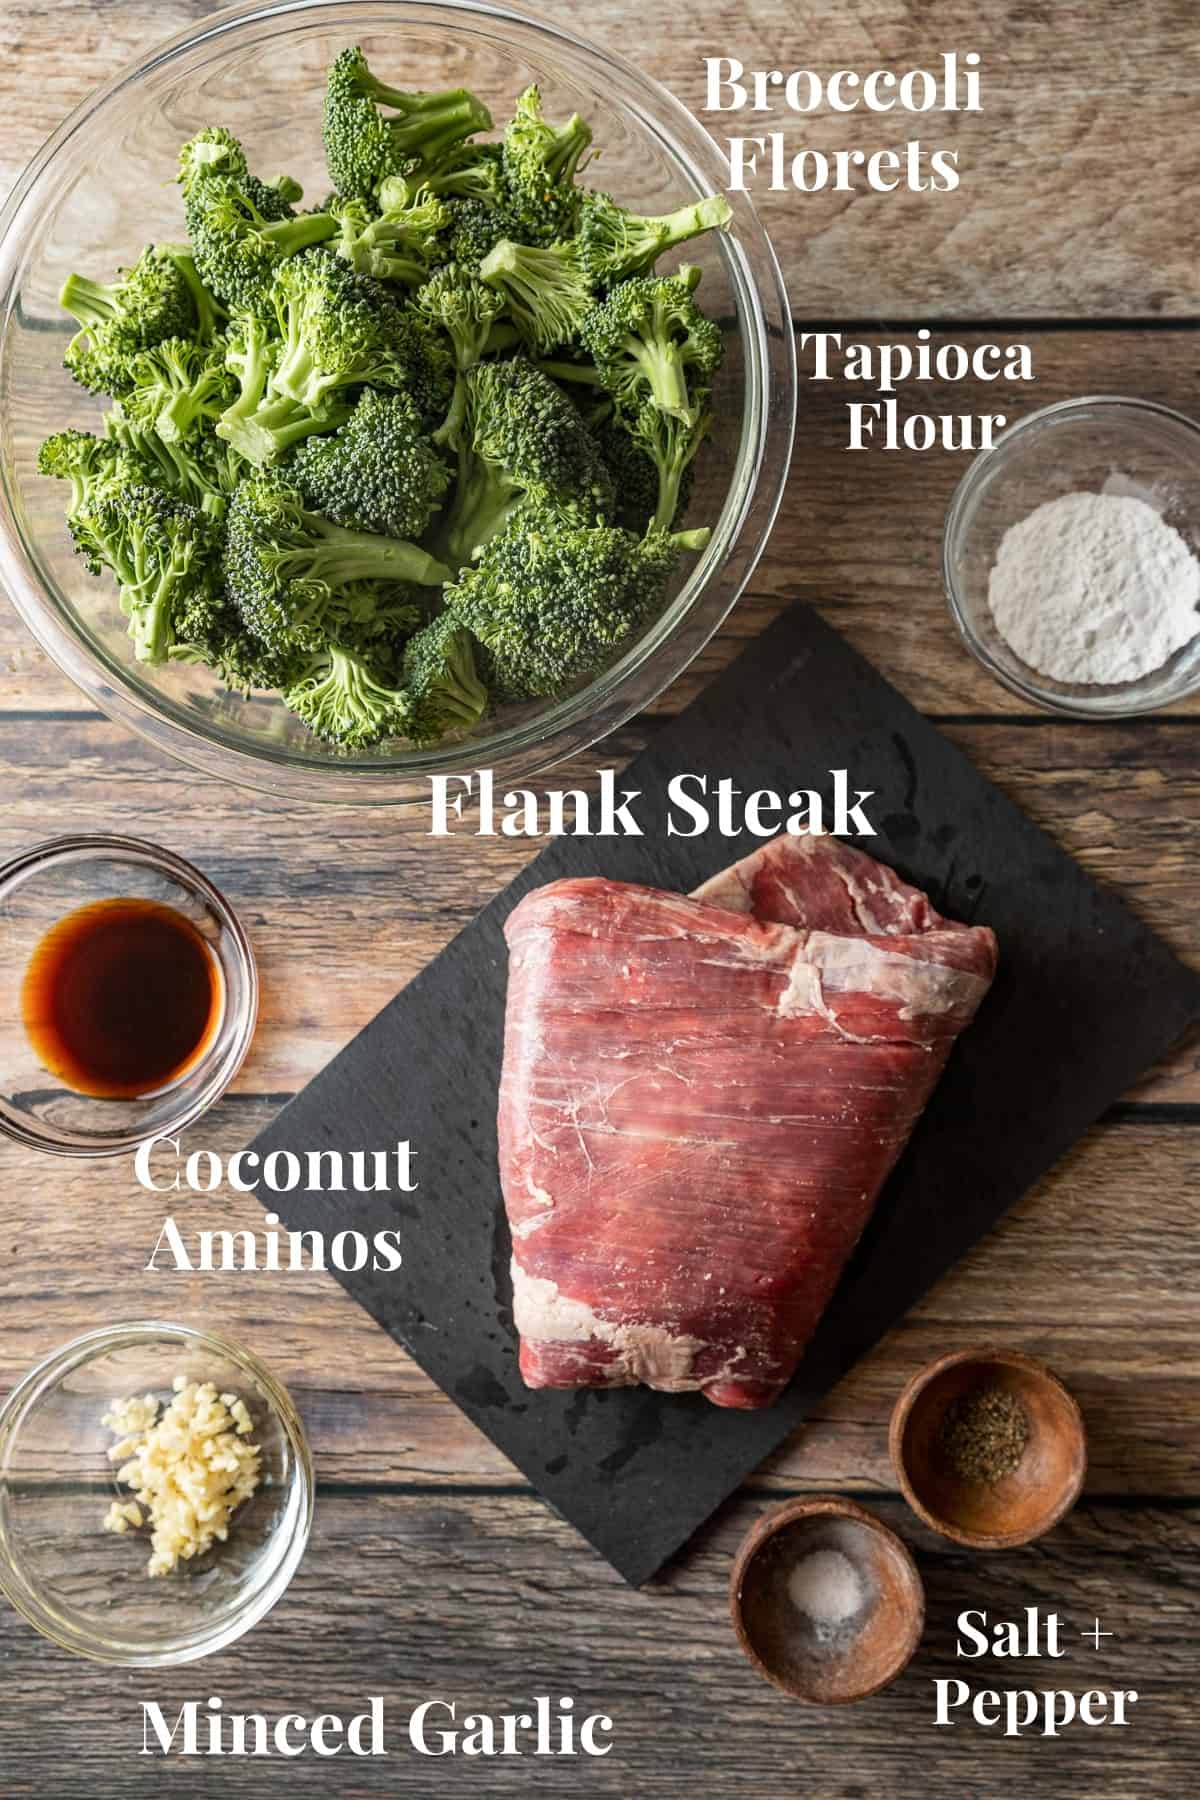 An overview photo of the ingredients needed for beef and broccoli on a wood background.